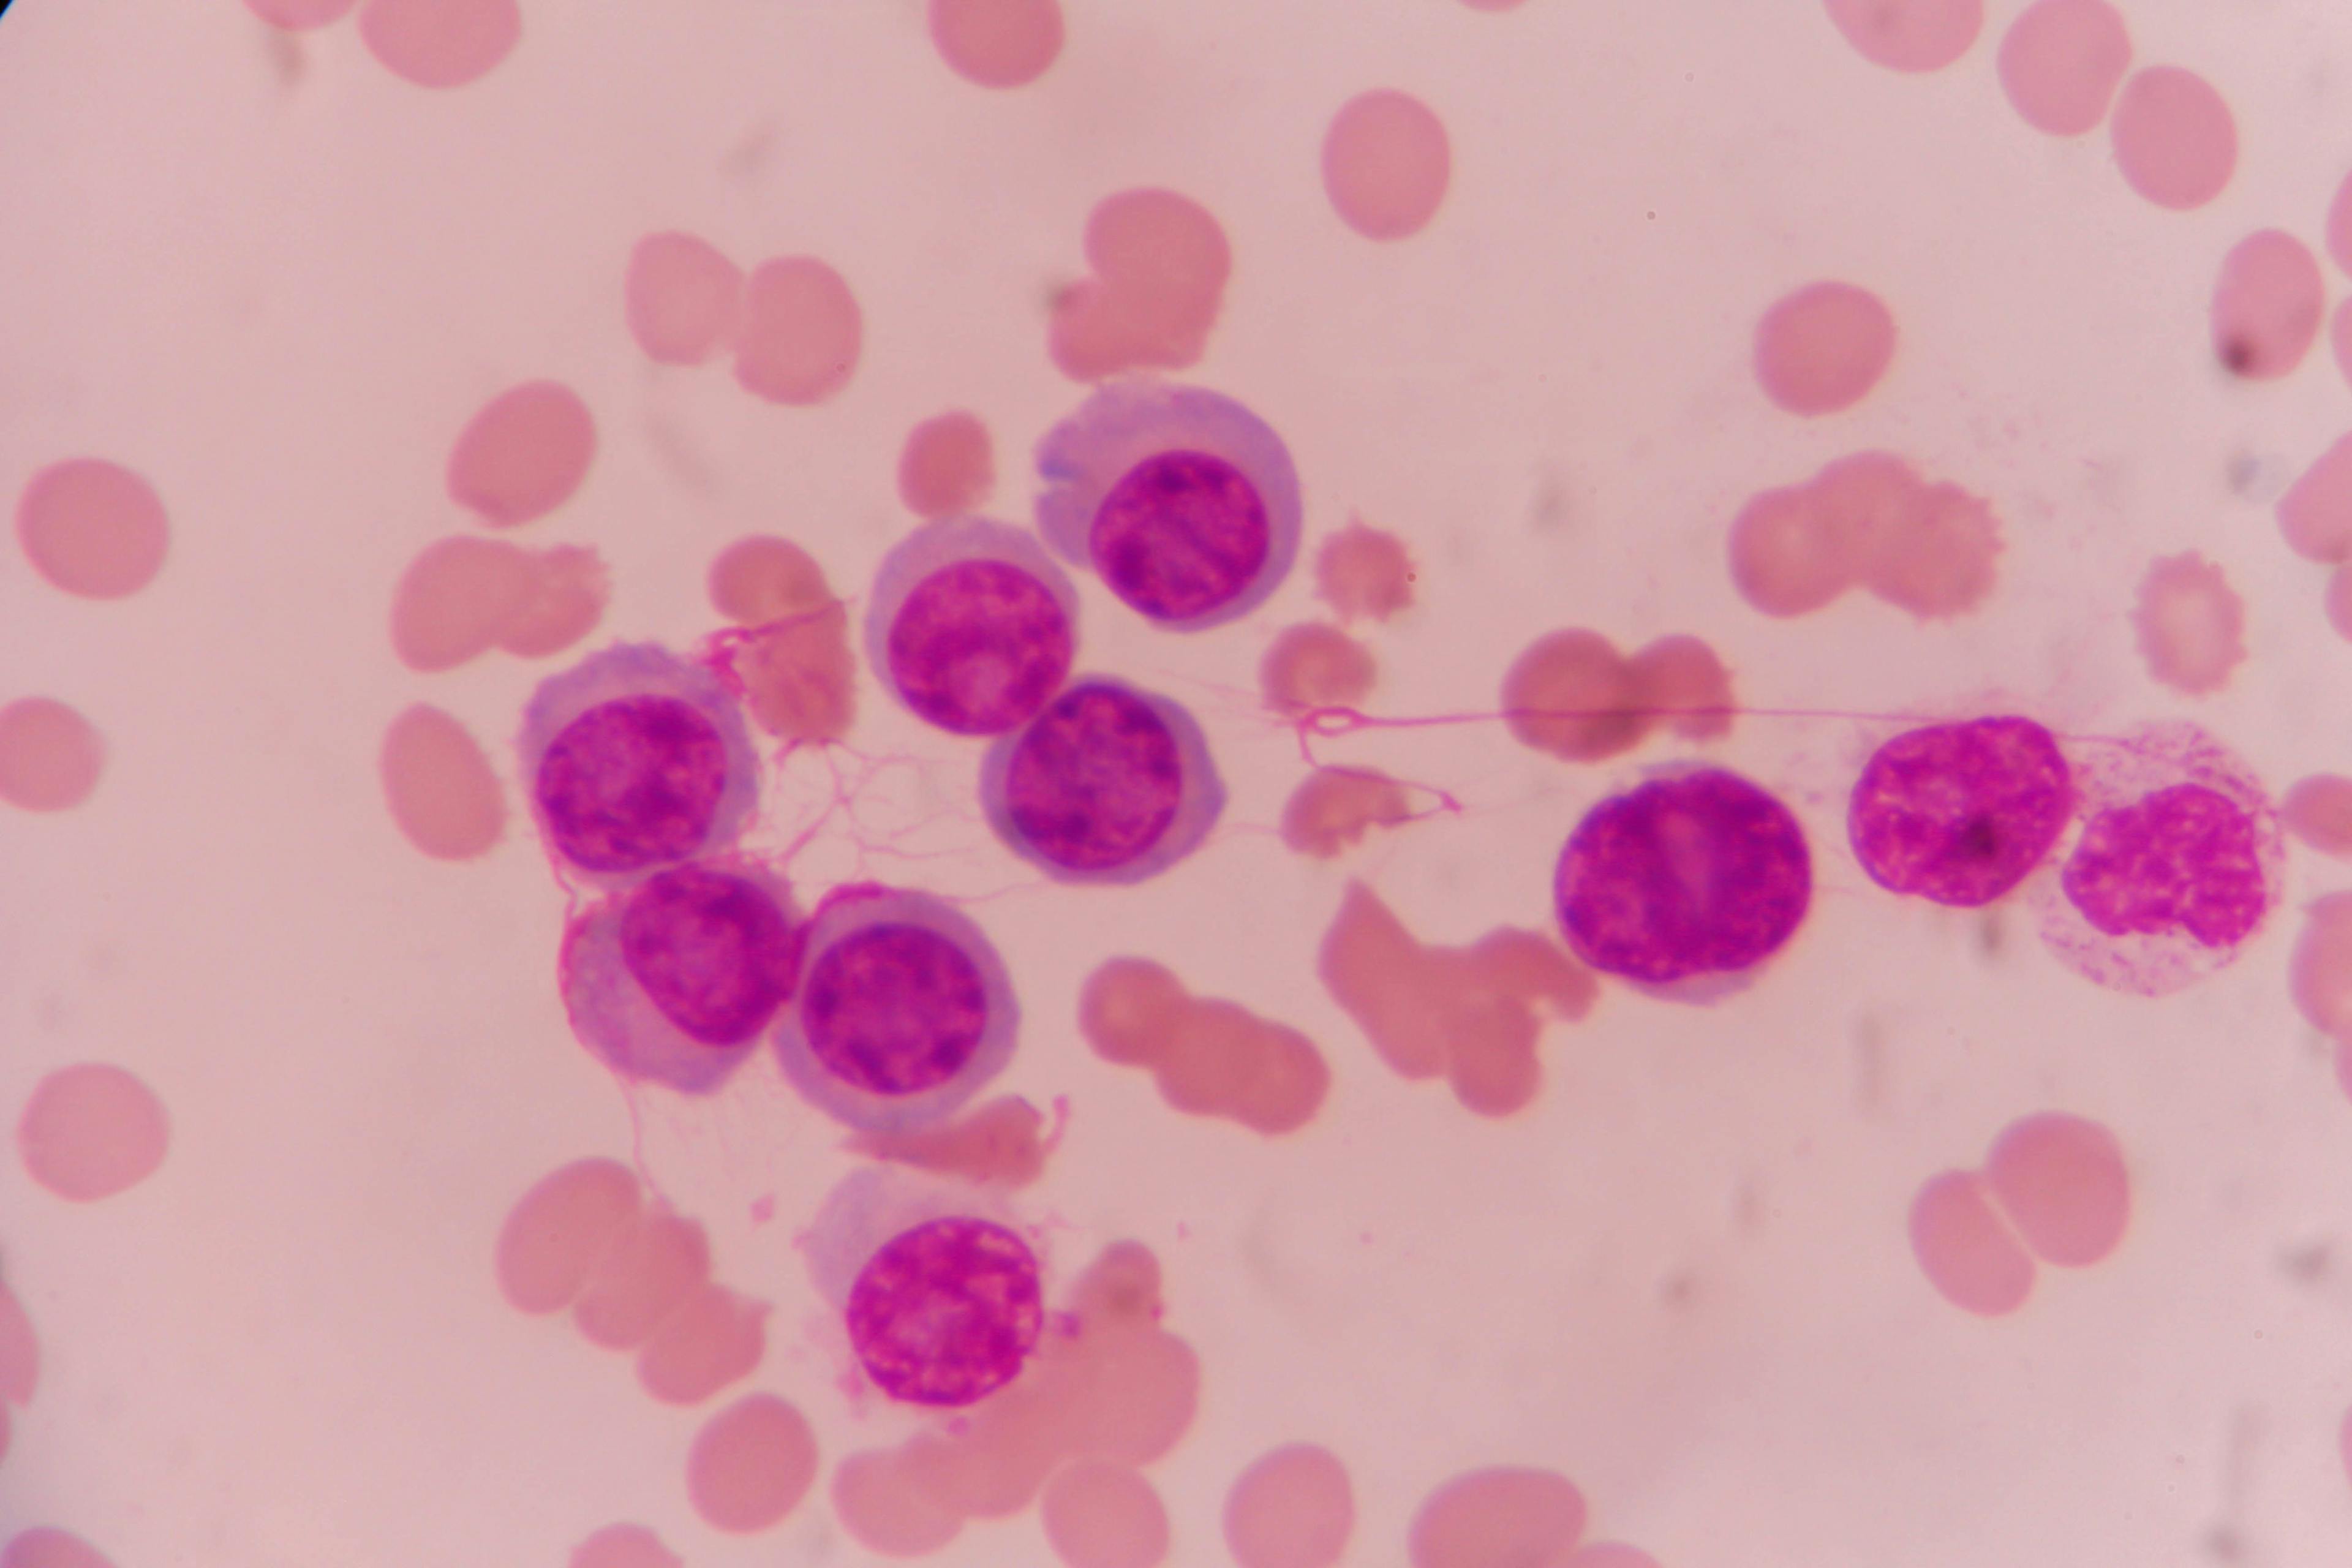 Individuals With Chronic Lymphocytic Leukemia Benefit More From iFCR Therapy Than Older Individuals